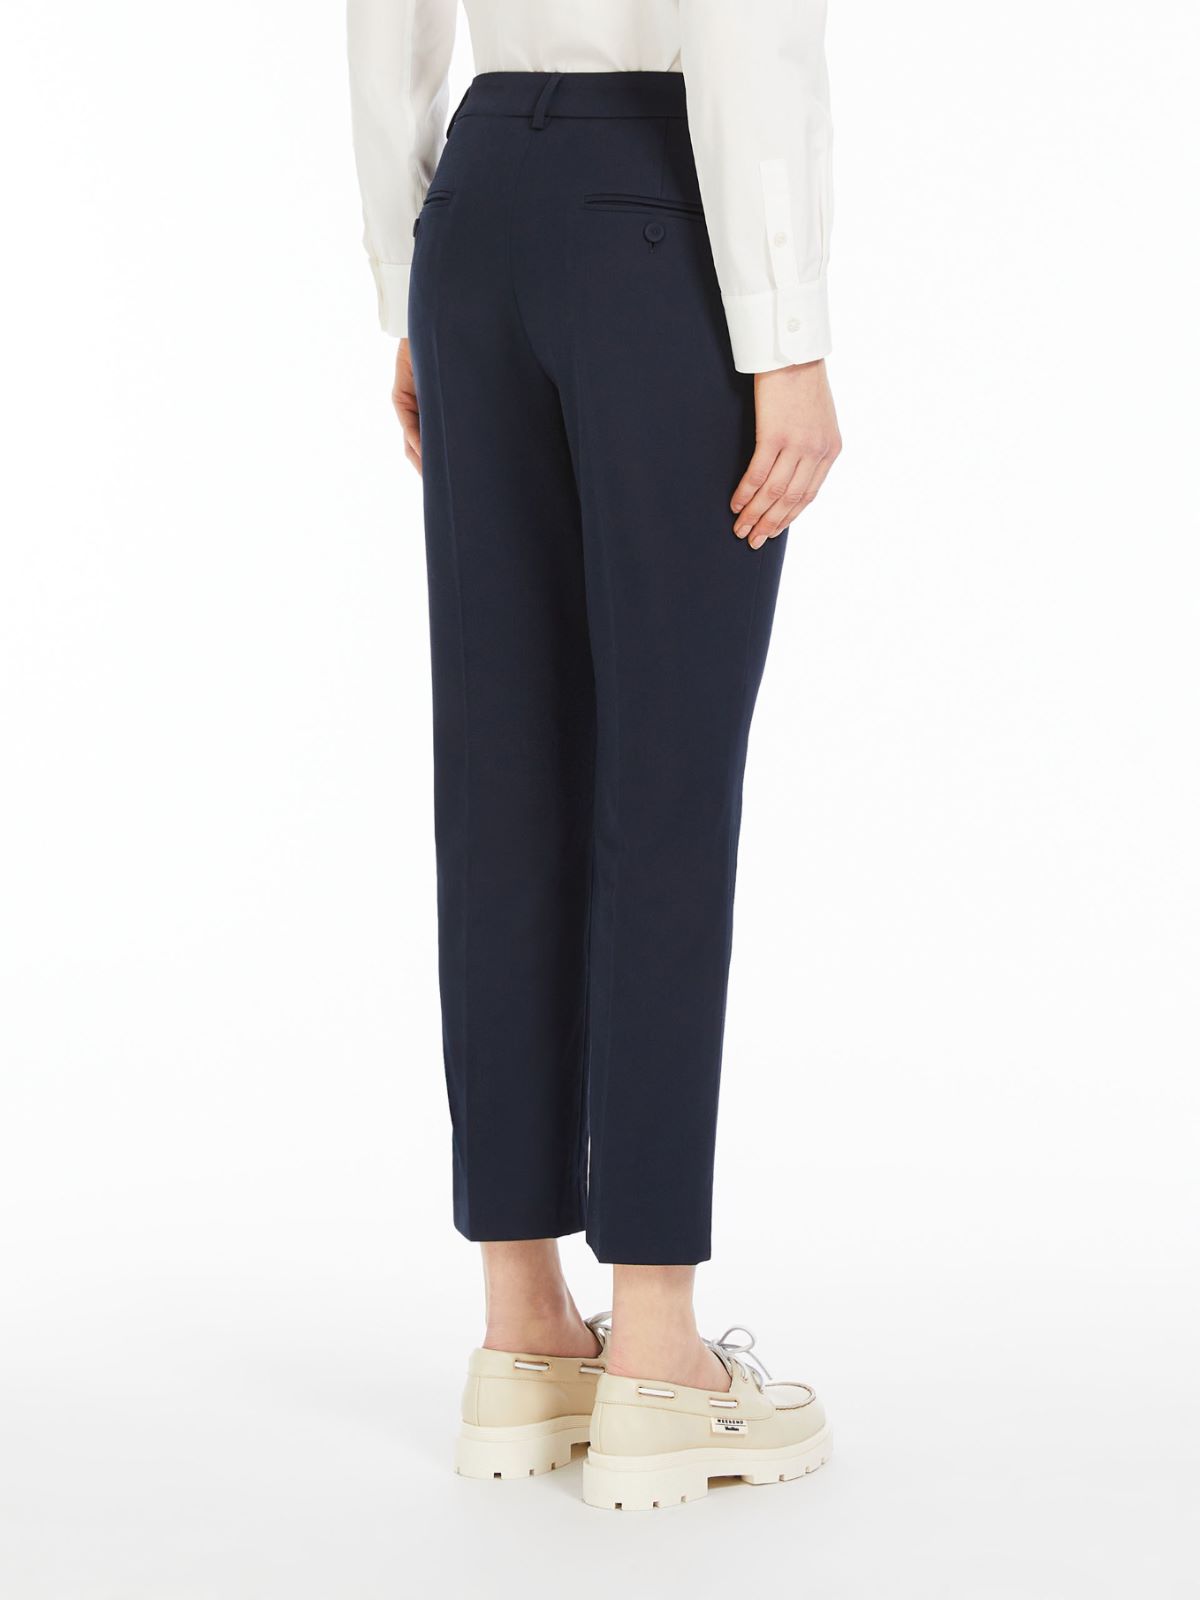 Peggy Cropped Trouser in Navy Blazer – Abendroth Golf